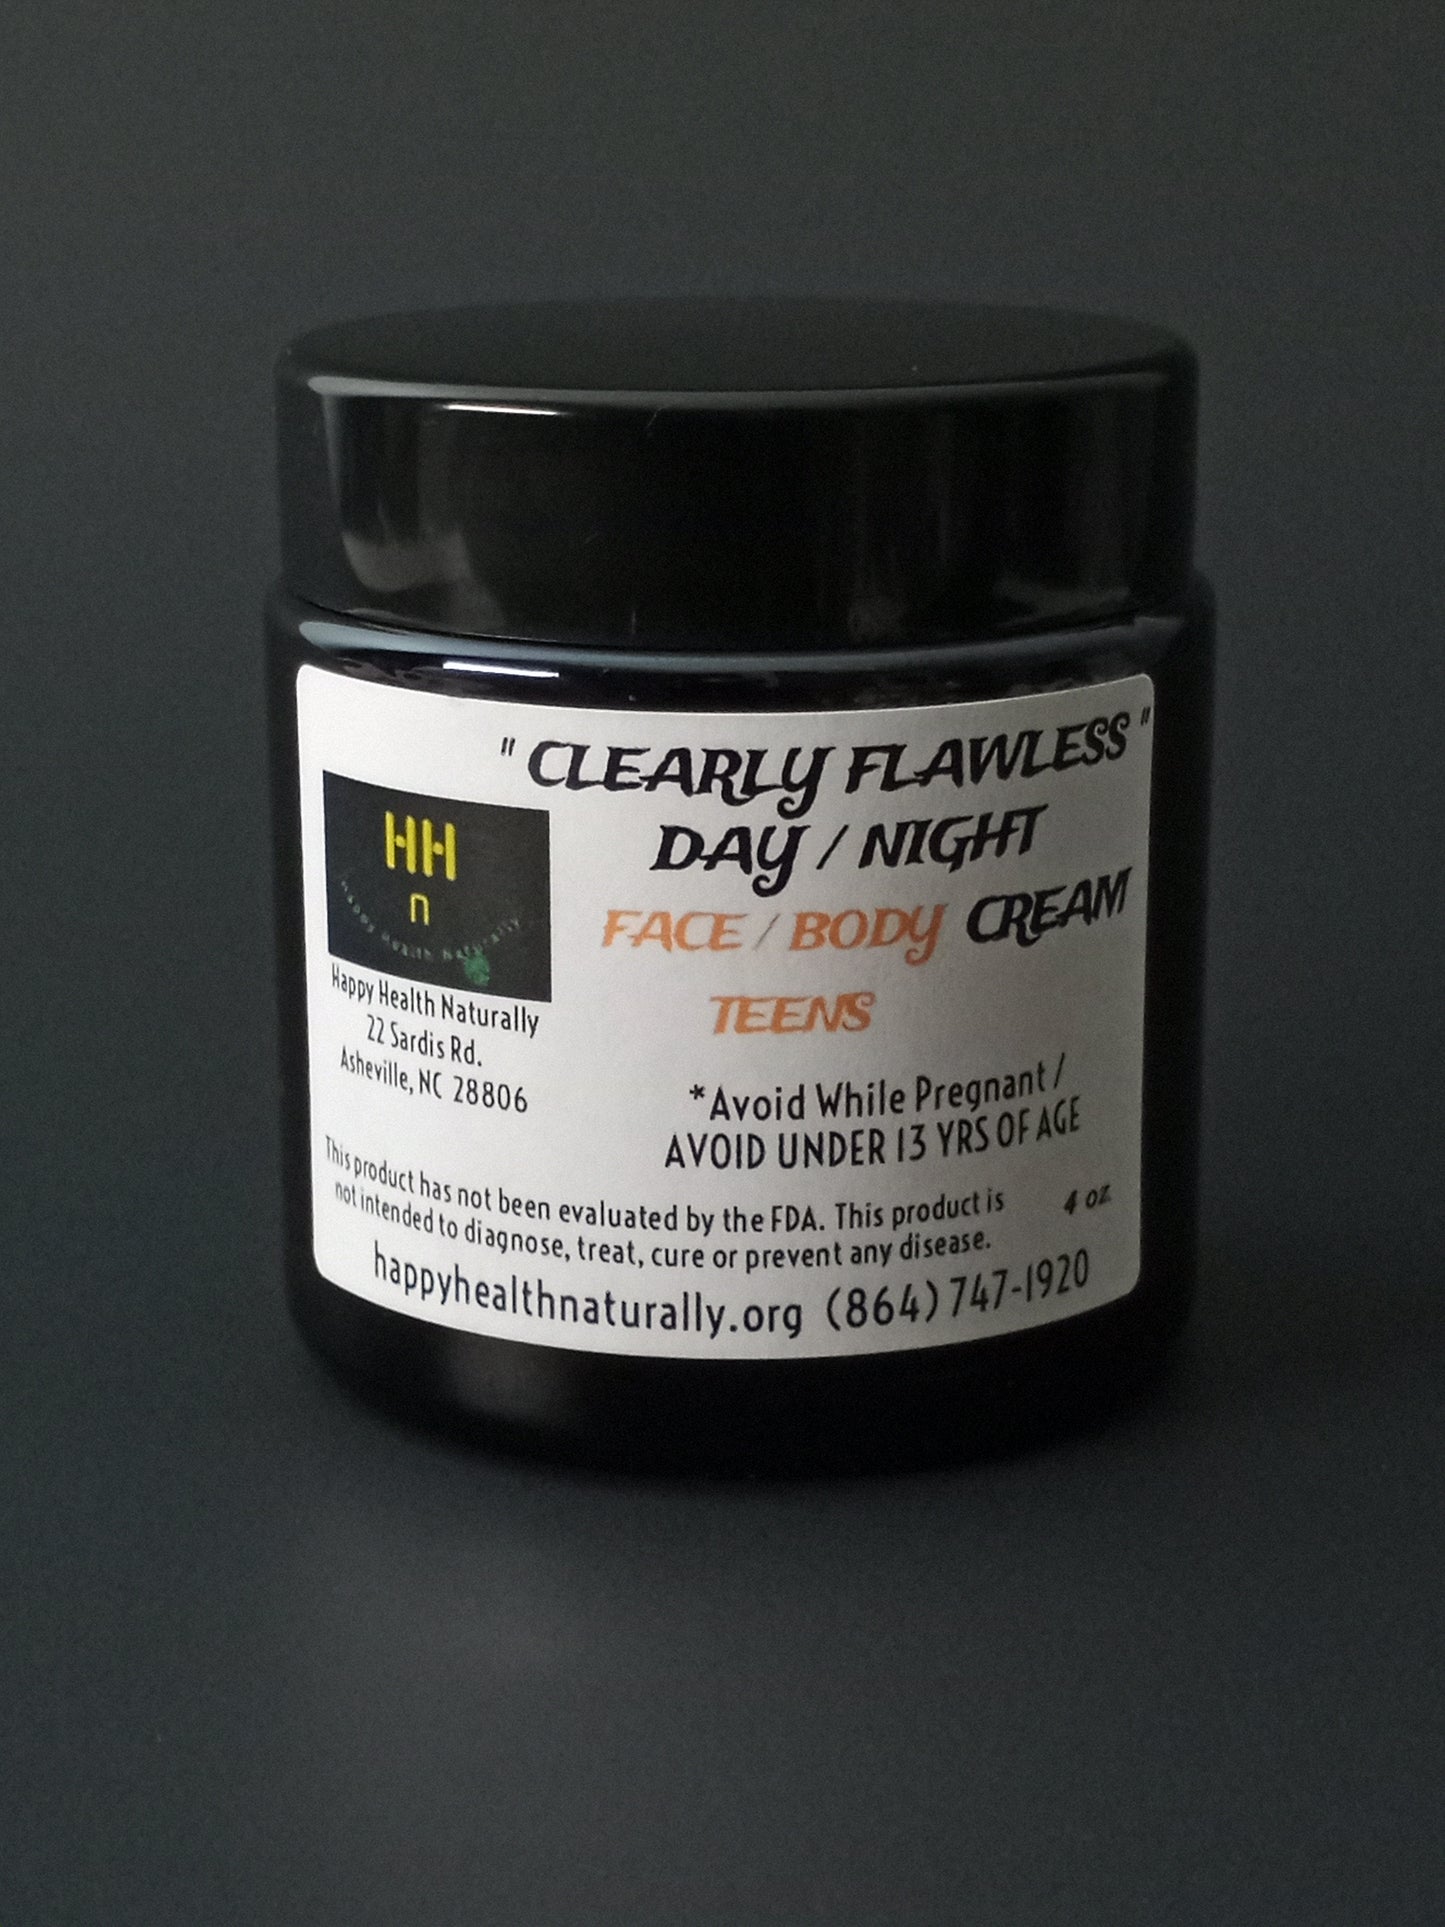 " CLEARLY FLAWLESS " DAY / NIGHT -FACE / BODY CREAM FOR TEENS 4 OZ.